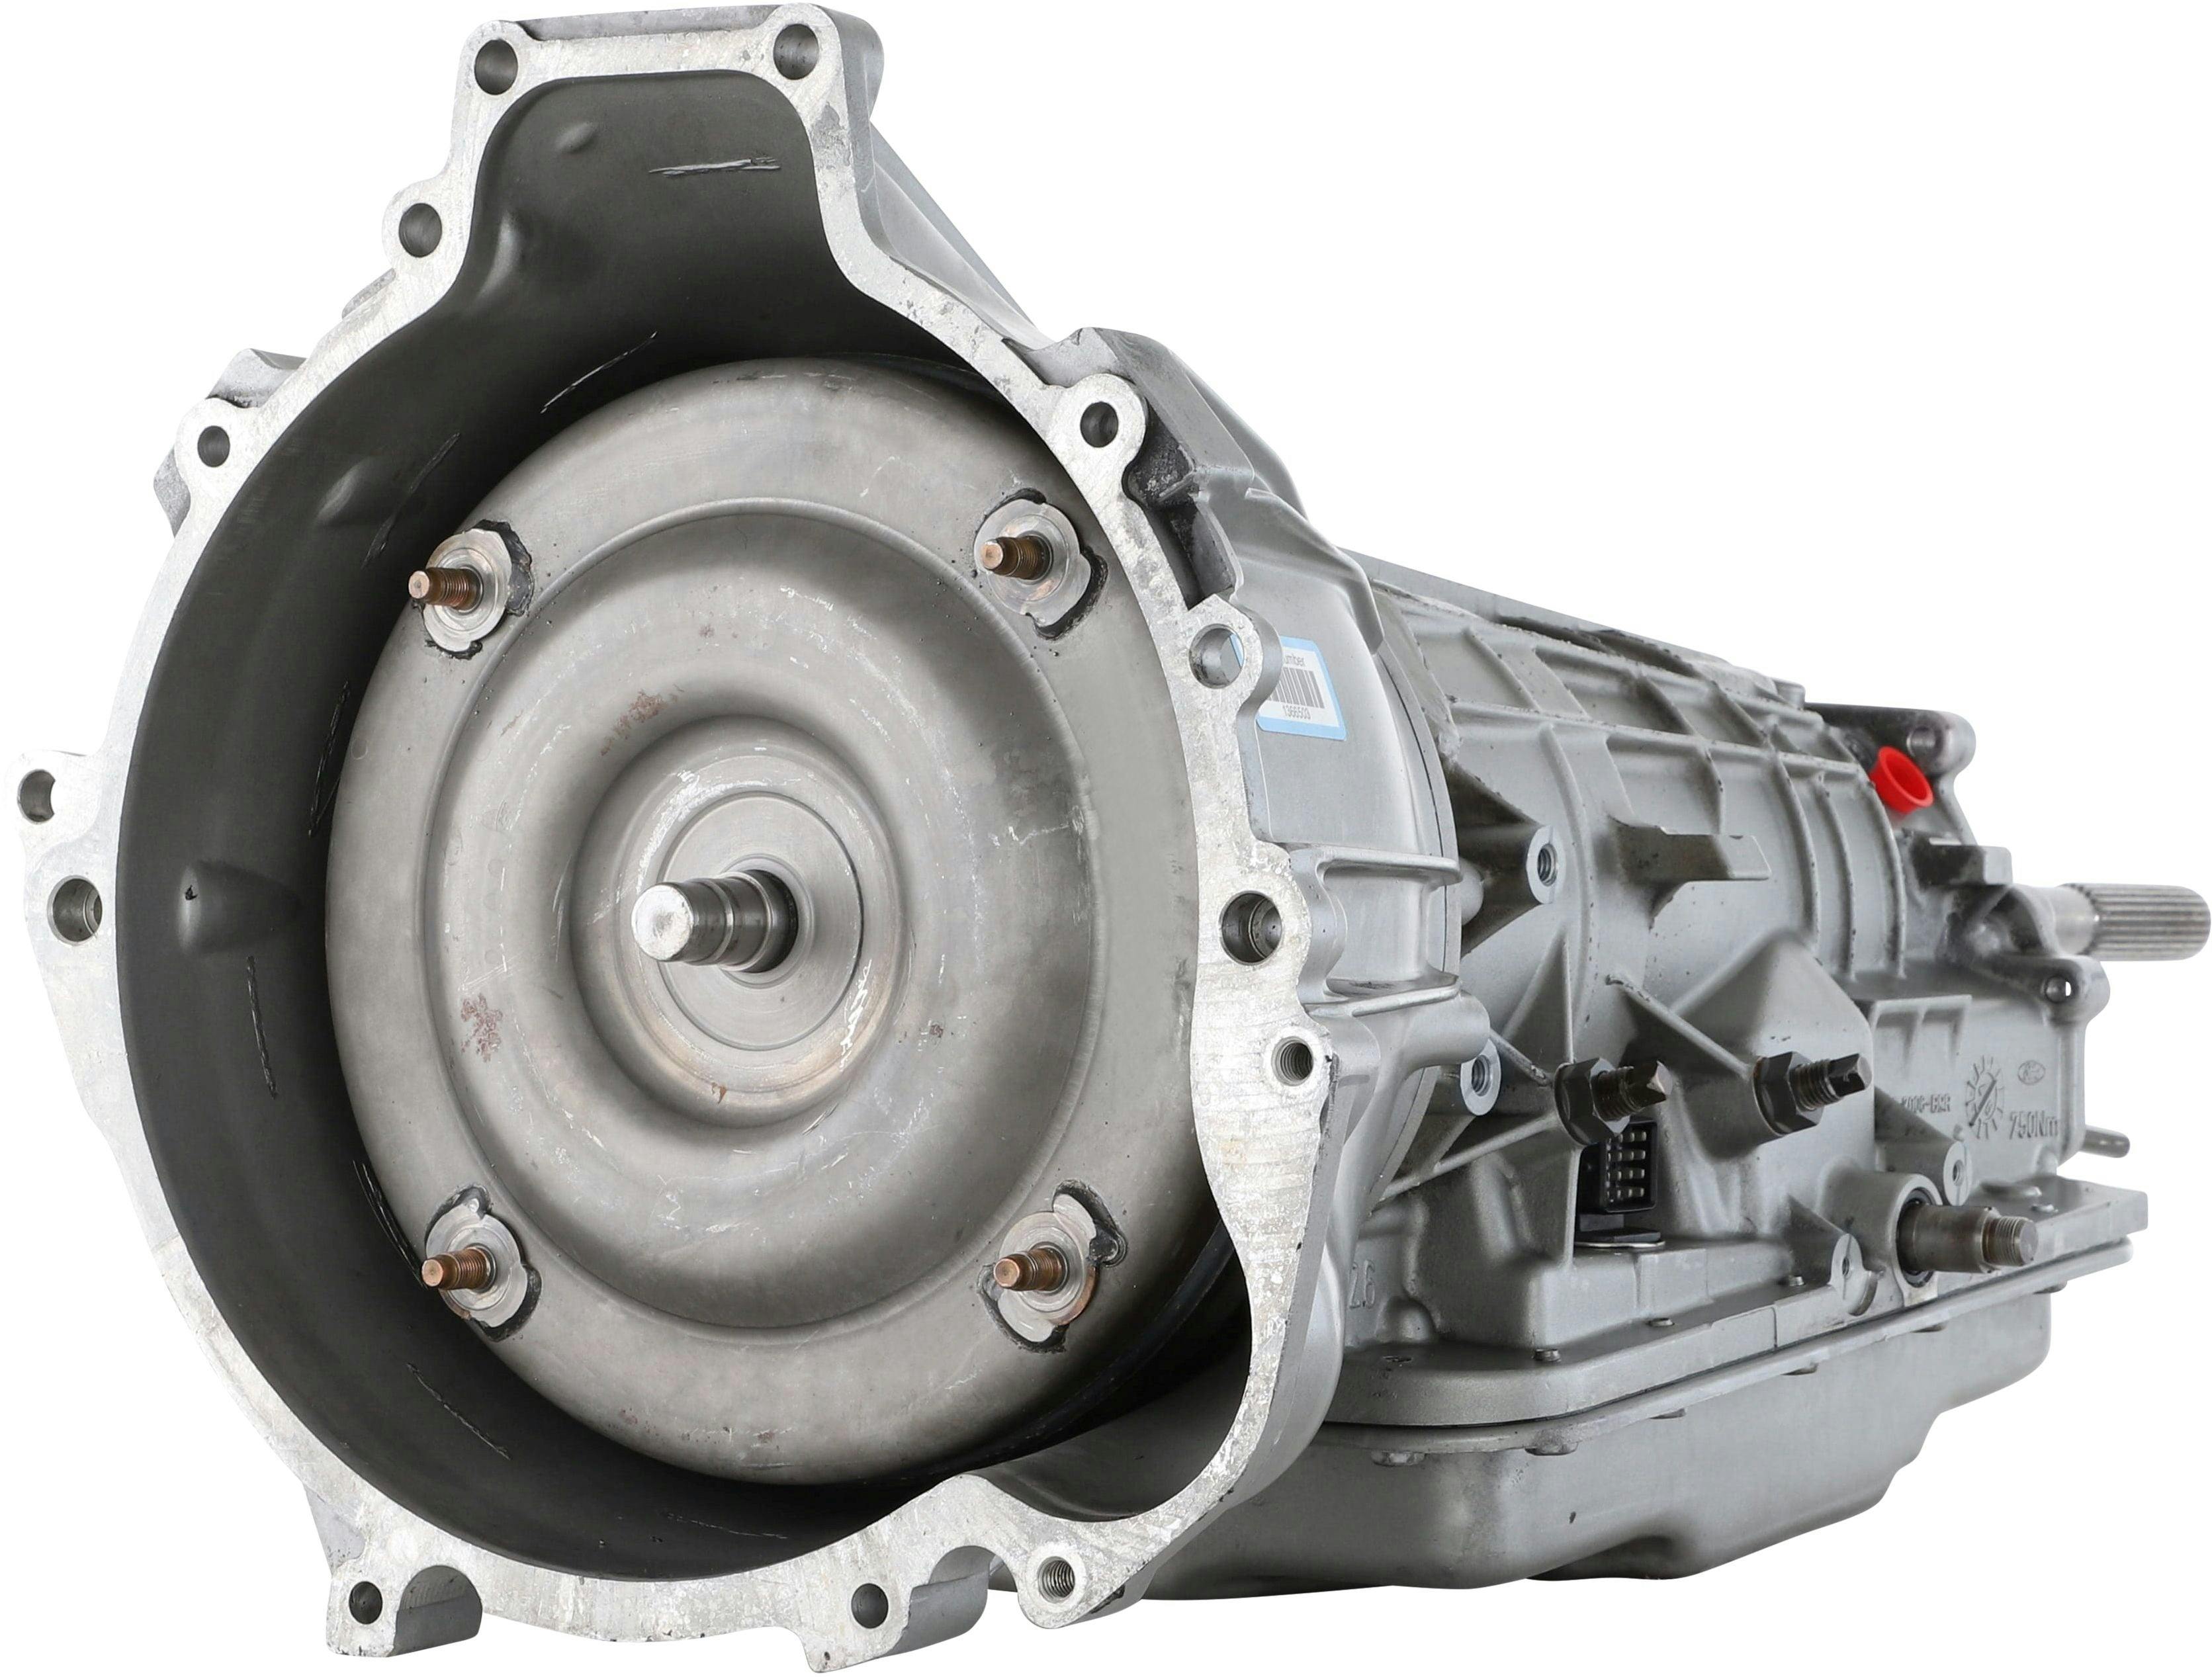 Automatic Transmission for 1997 Ford Aerostar/Explorer/Ranger and Mazda B4000 RWD with 4L V6 Engine